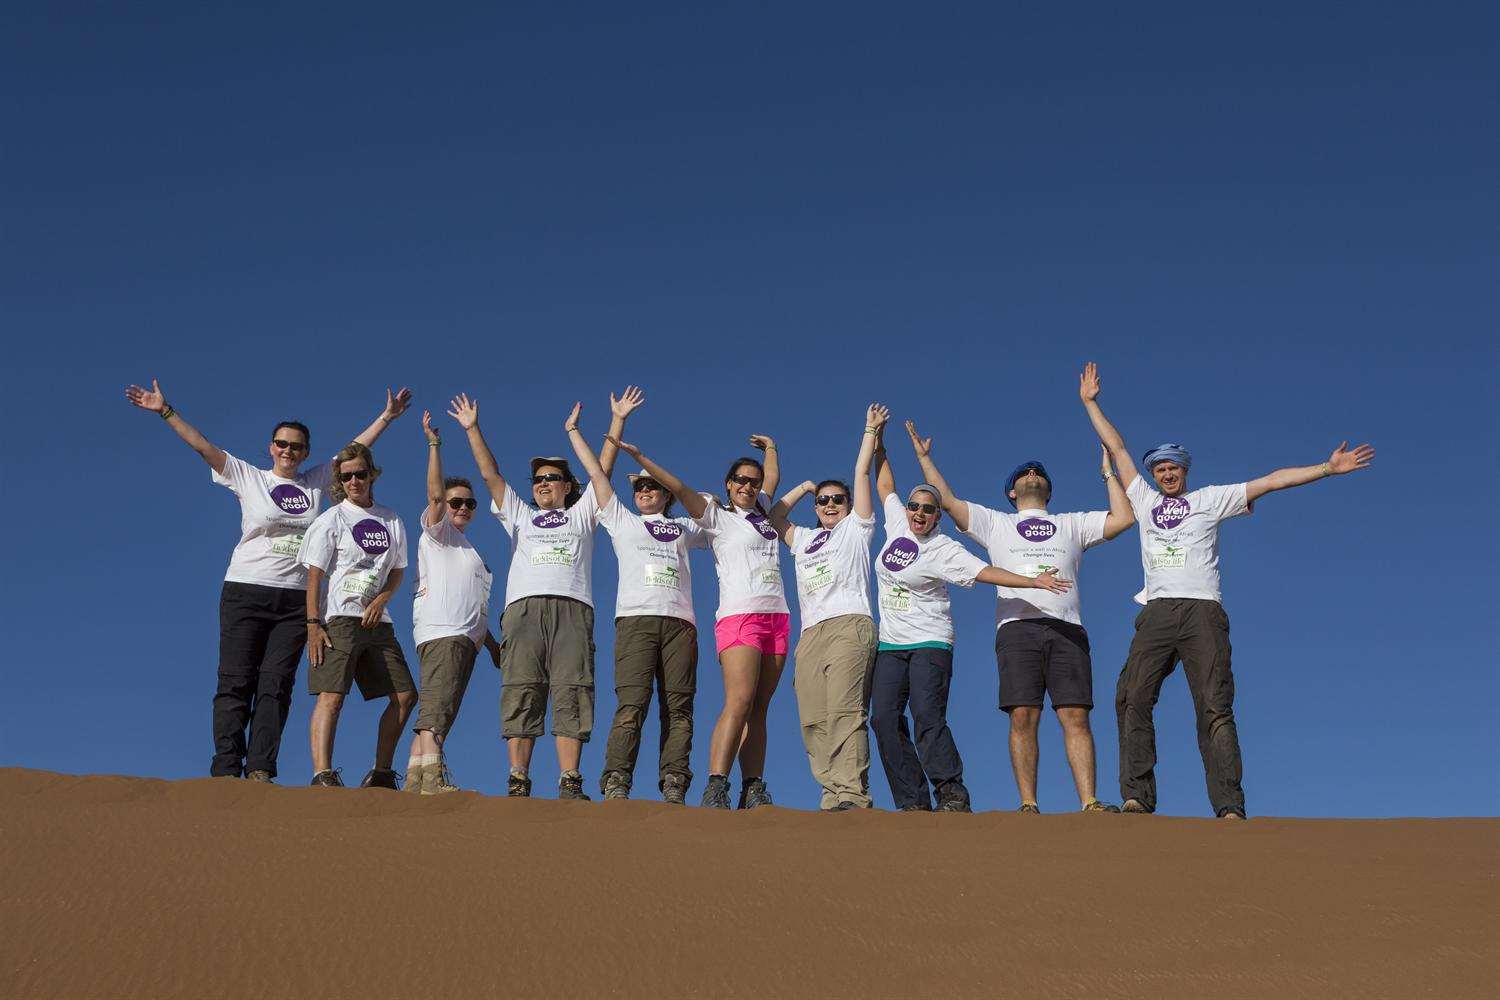 The trekkers dubbed themselves the 'Sahara Warriors'